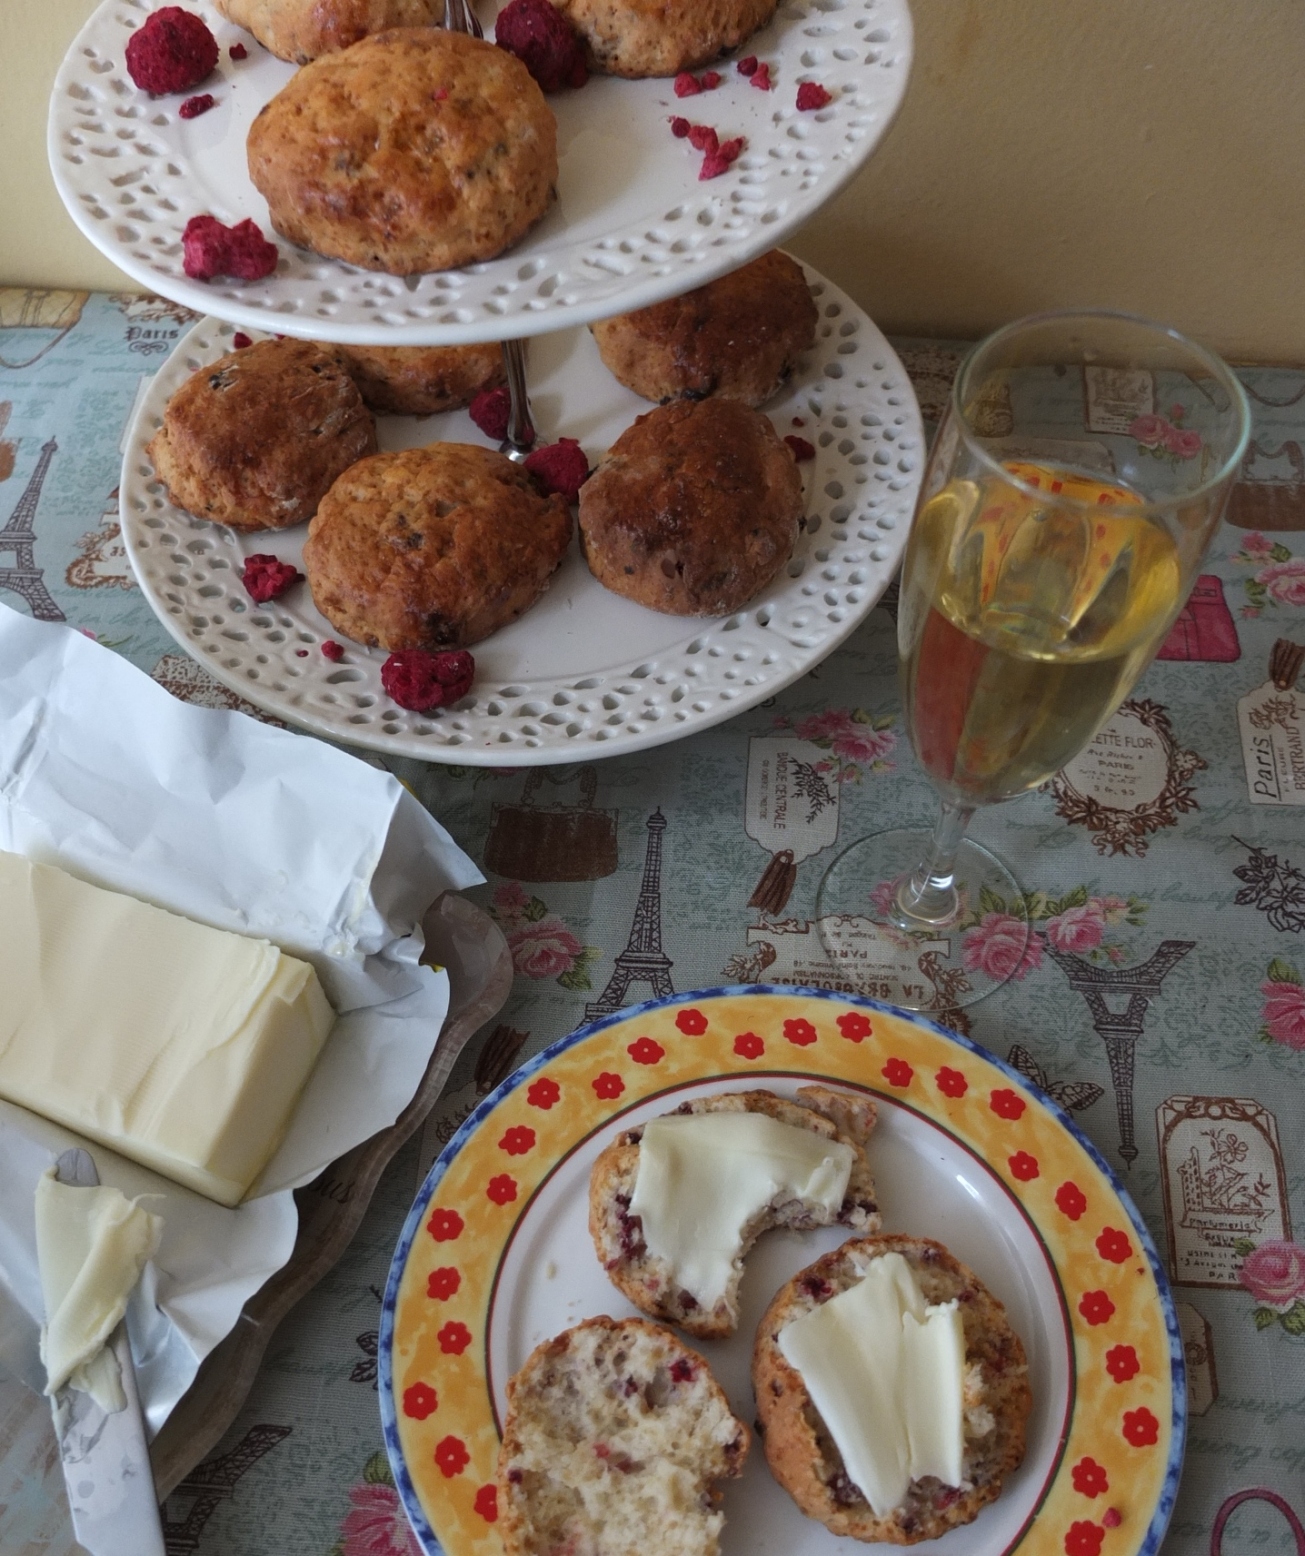 Afternoon champagne tea with Ispahan scones